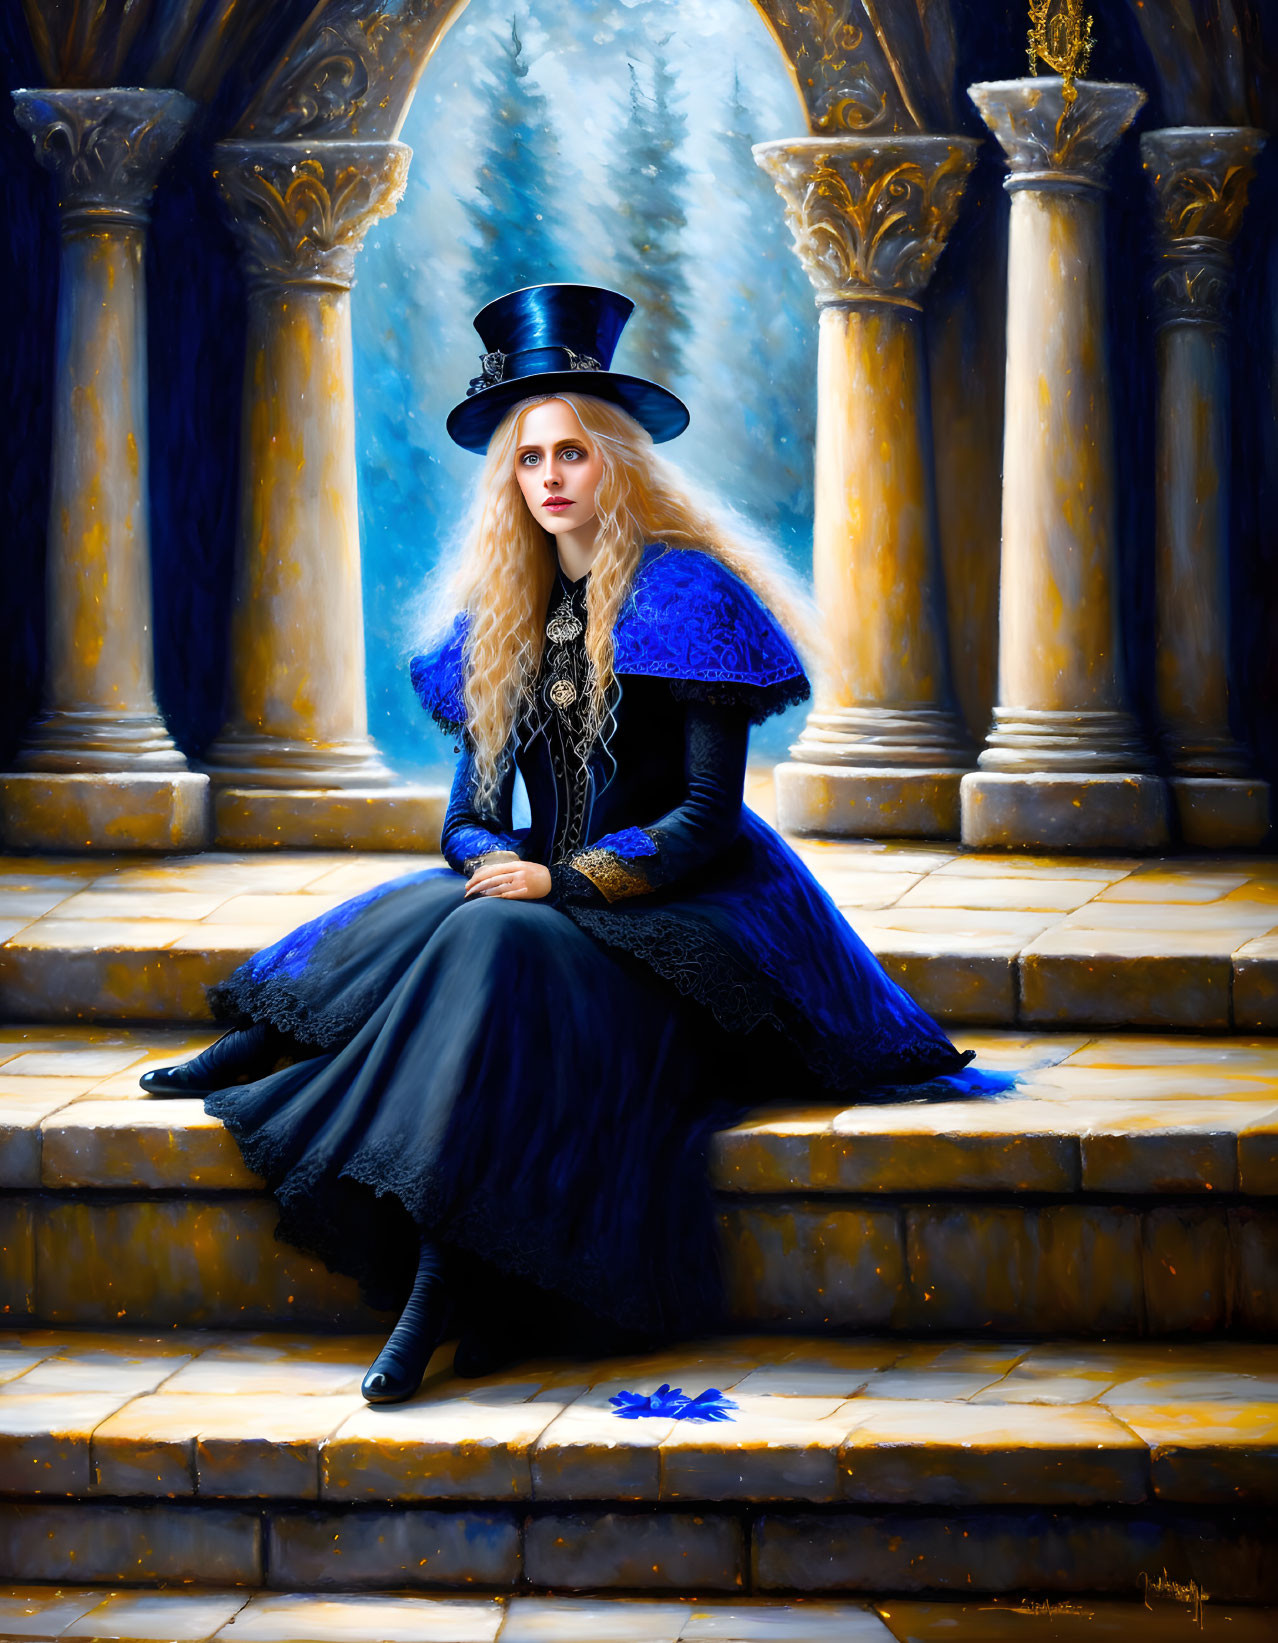 Victorian-era woman in blue cloak and top hat sitting on stone steps with gothic columns.